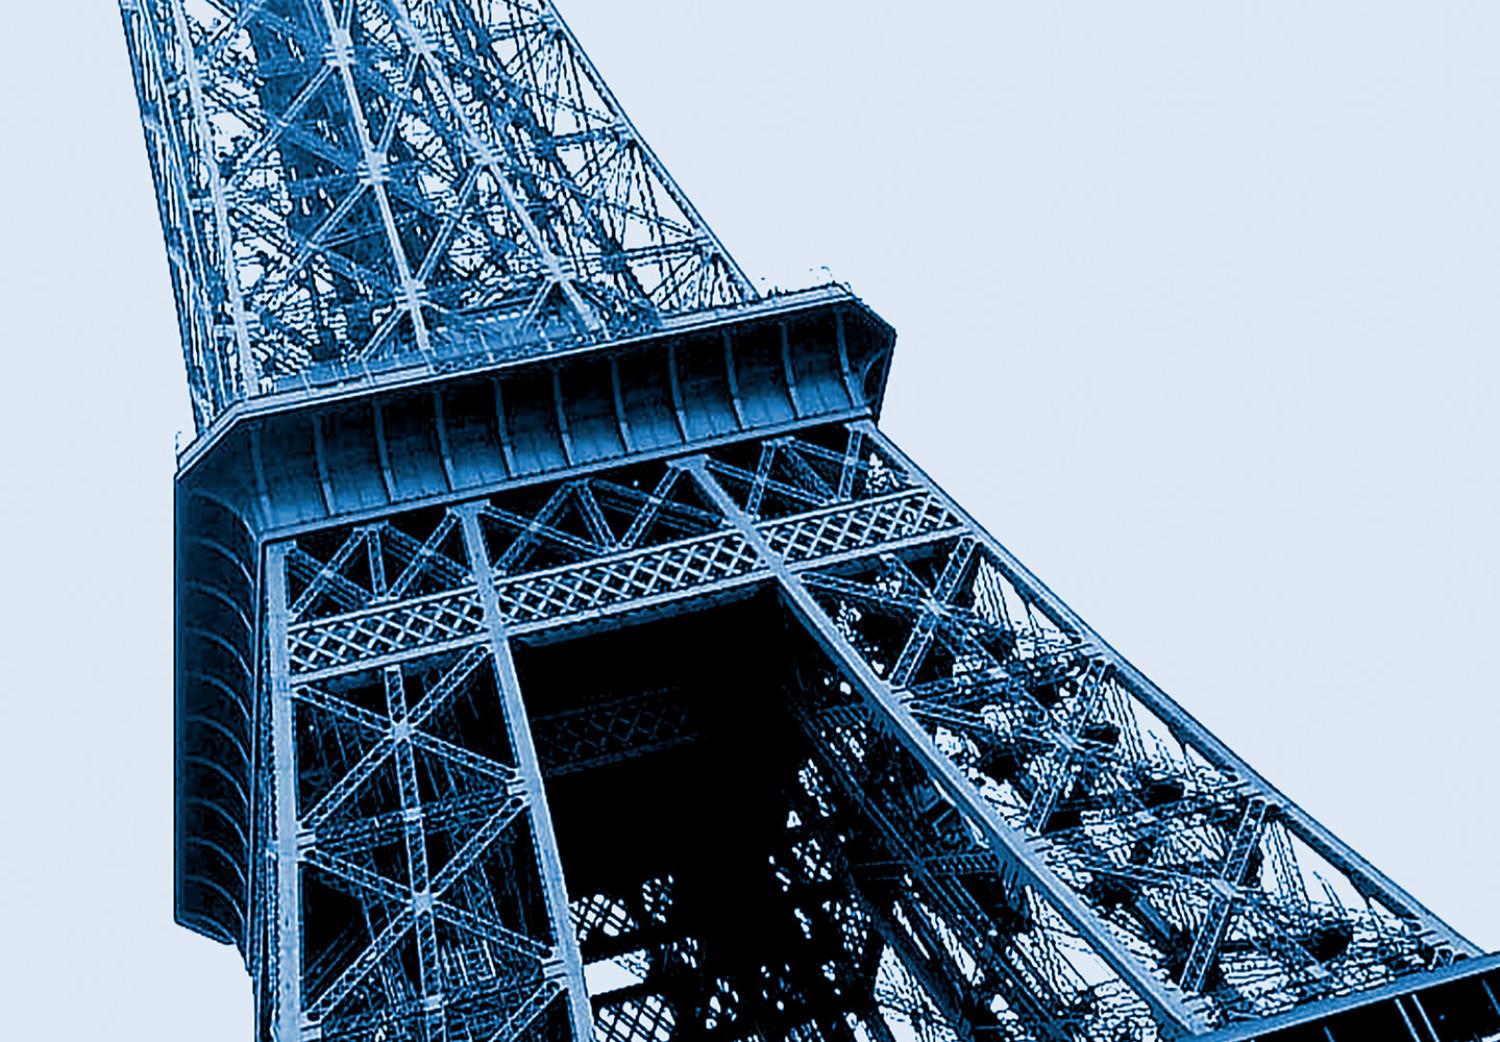 Poster Paris Collage - Three Photos of the Eiffel Tower in the National Colors of France